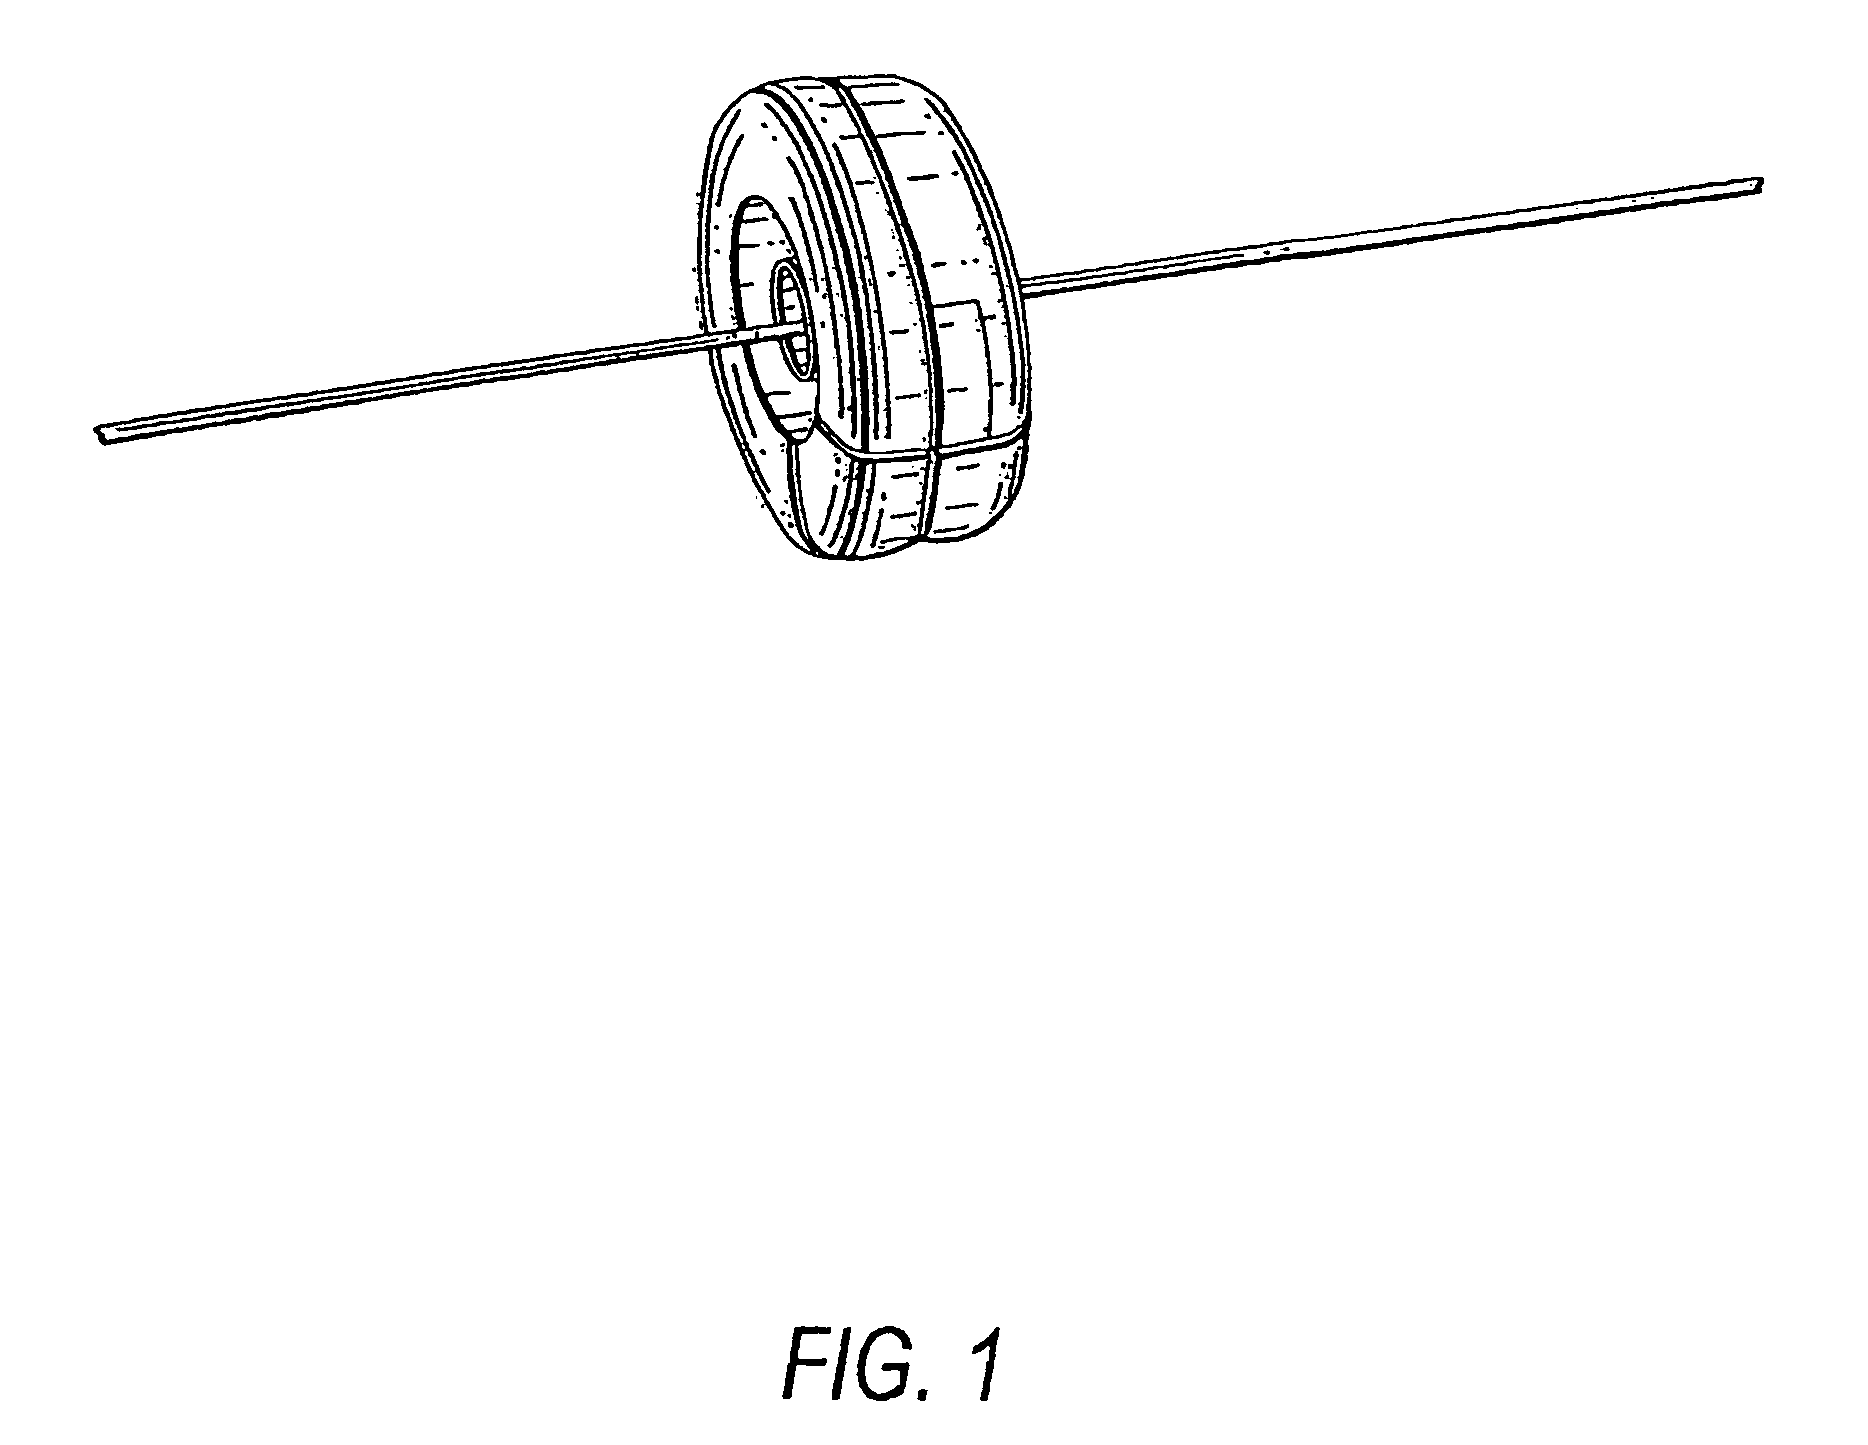 Electrical instrument platform for mounting on and removal from an energized high voltage power conductor